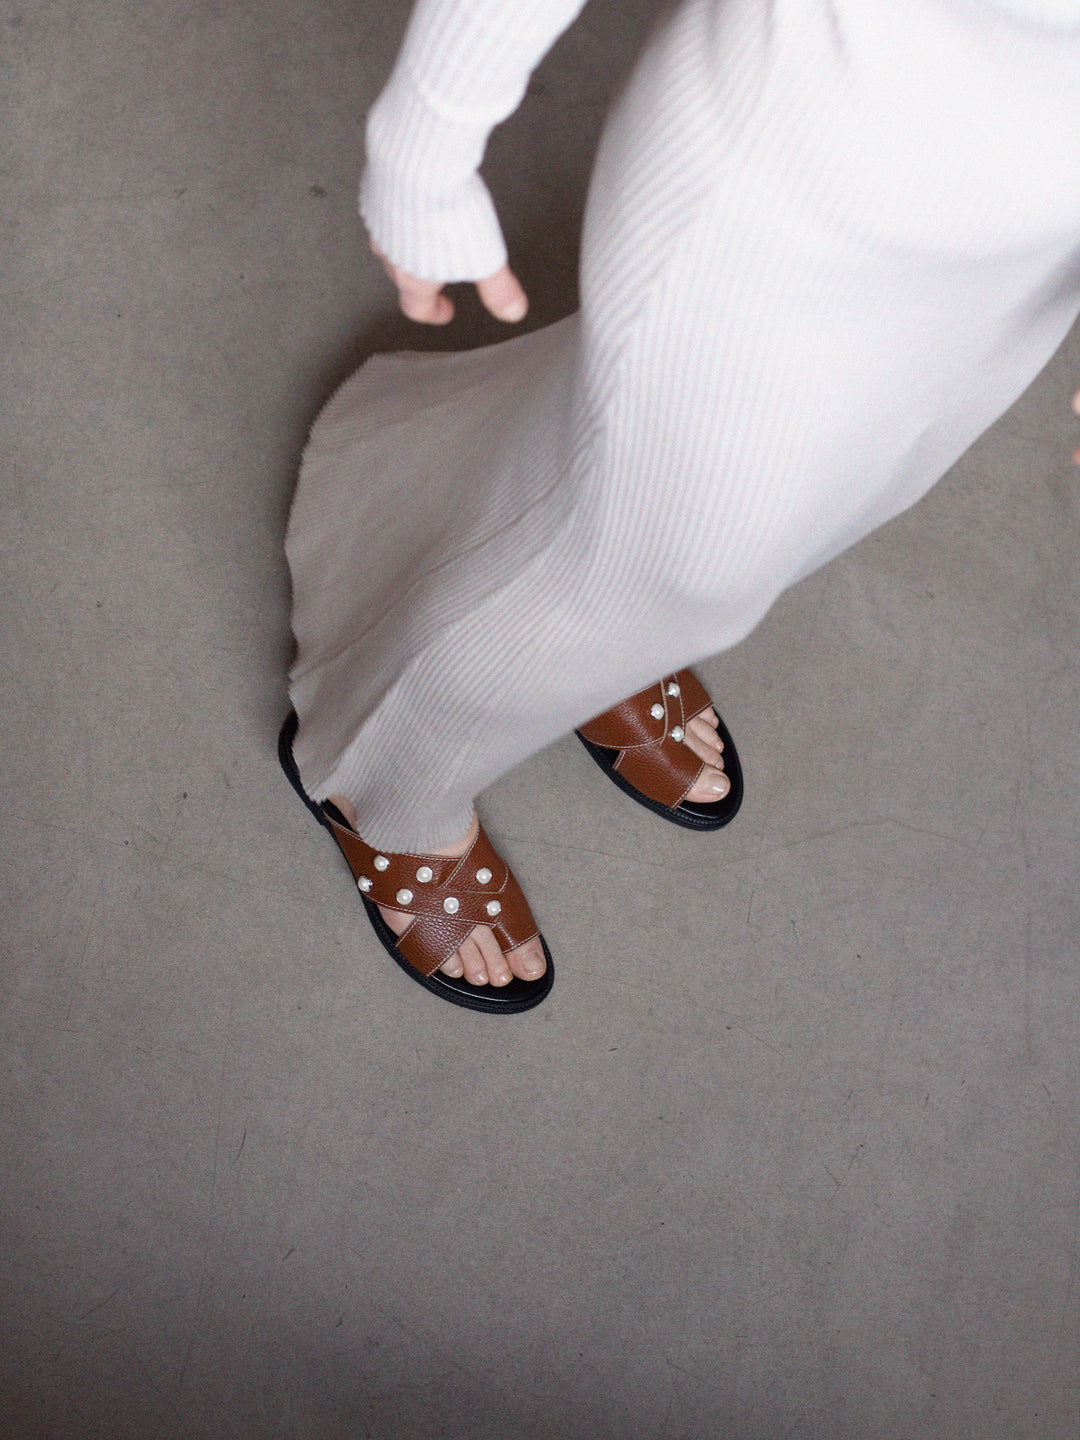 Blankens brown leather sandal The Mette. Made in Europe chrome-free.